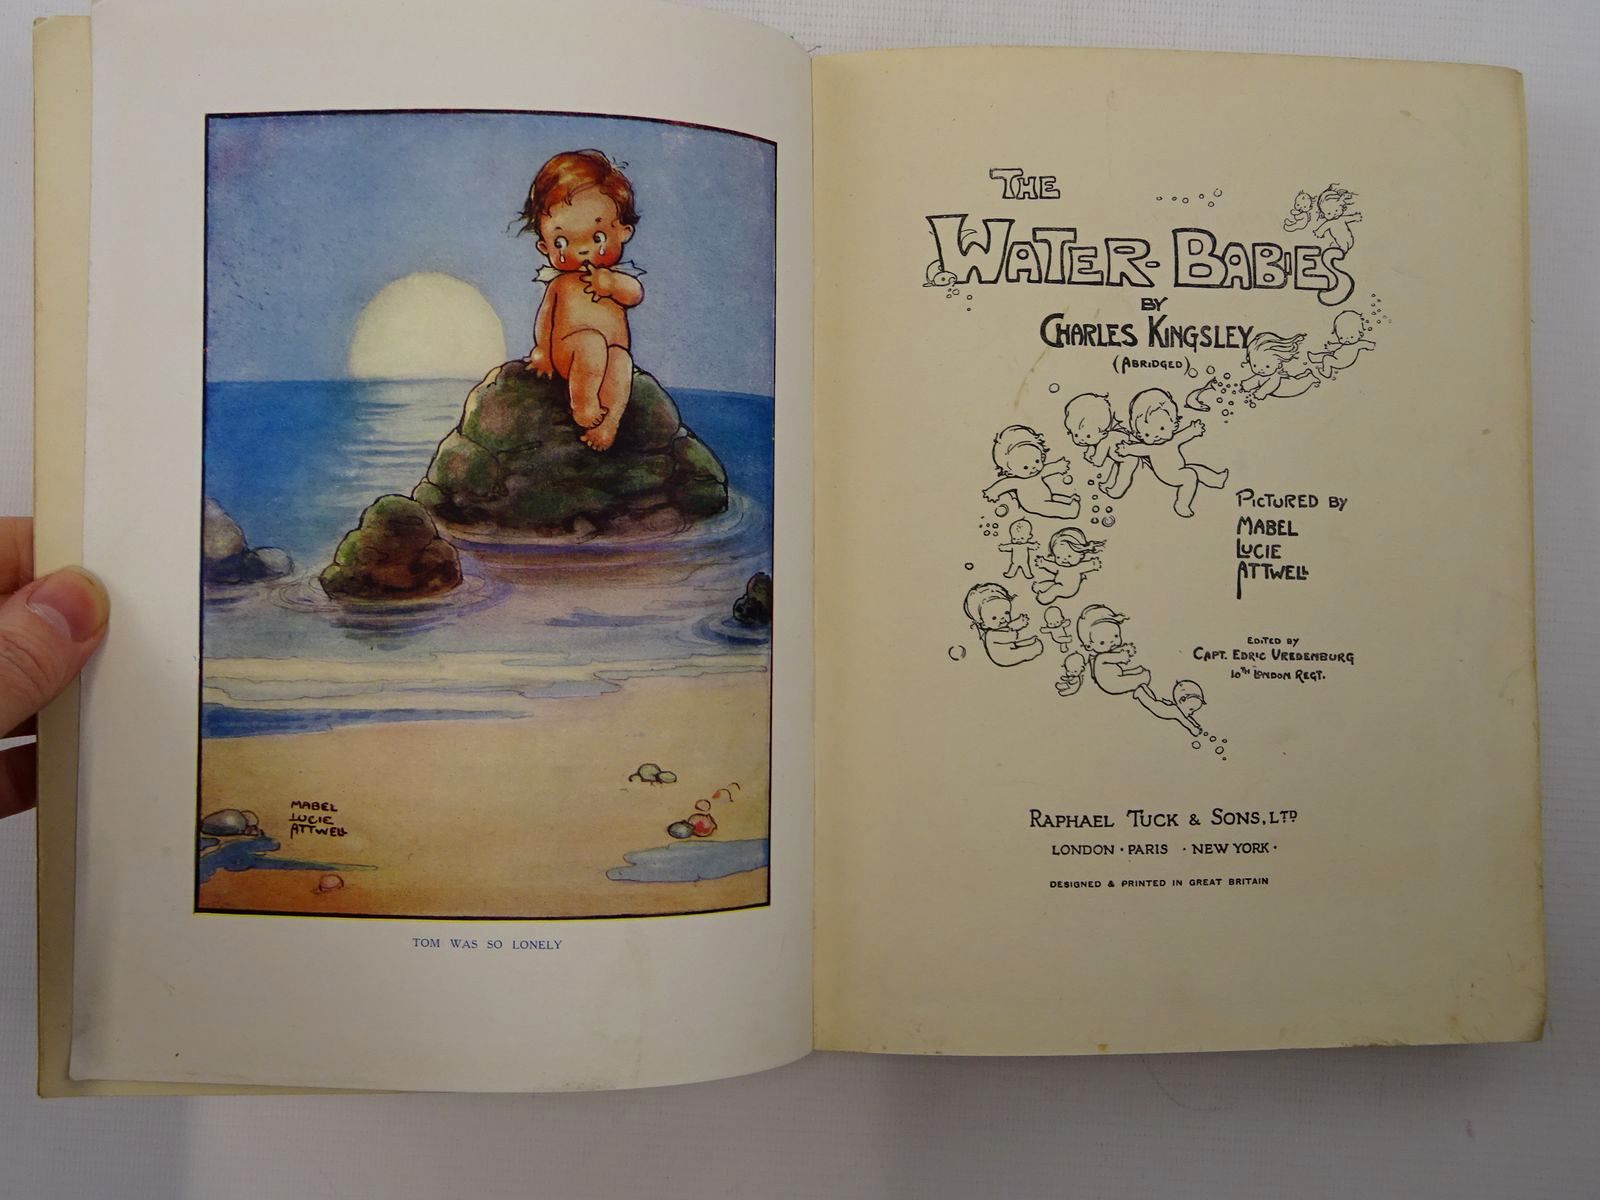 Photo of THE WATER BABIES written by Kingsley, Charles illustrated by Attwell, Mabel Lucie published by Raphael Tuck & Sons Ltd. (STOCK CODE: 2124734)  for sale by Stella & Rose's Books